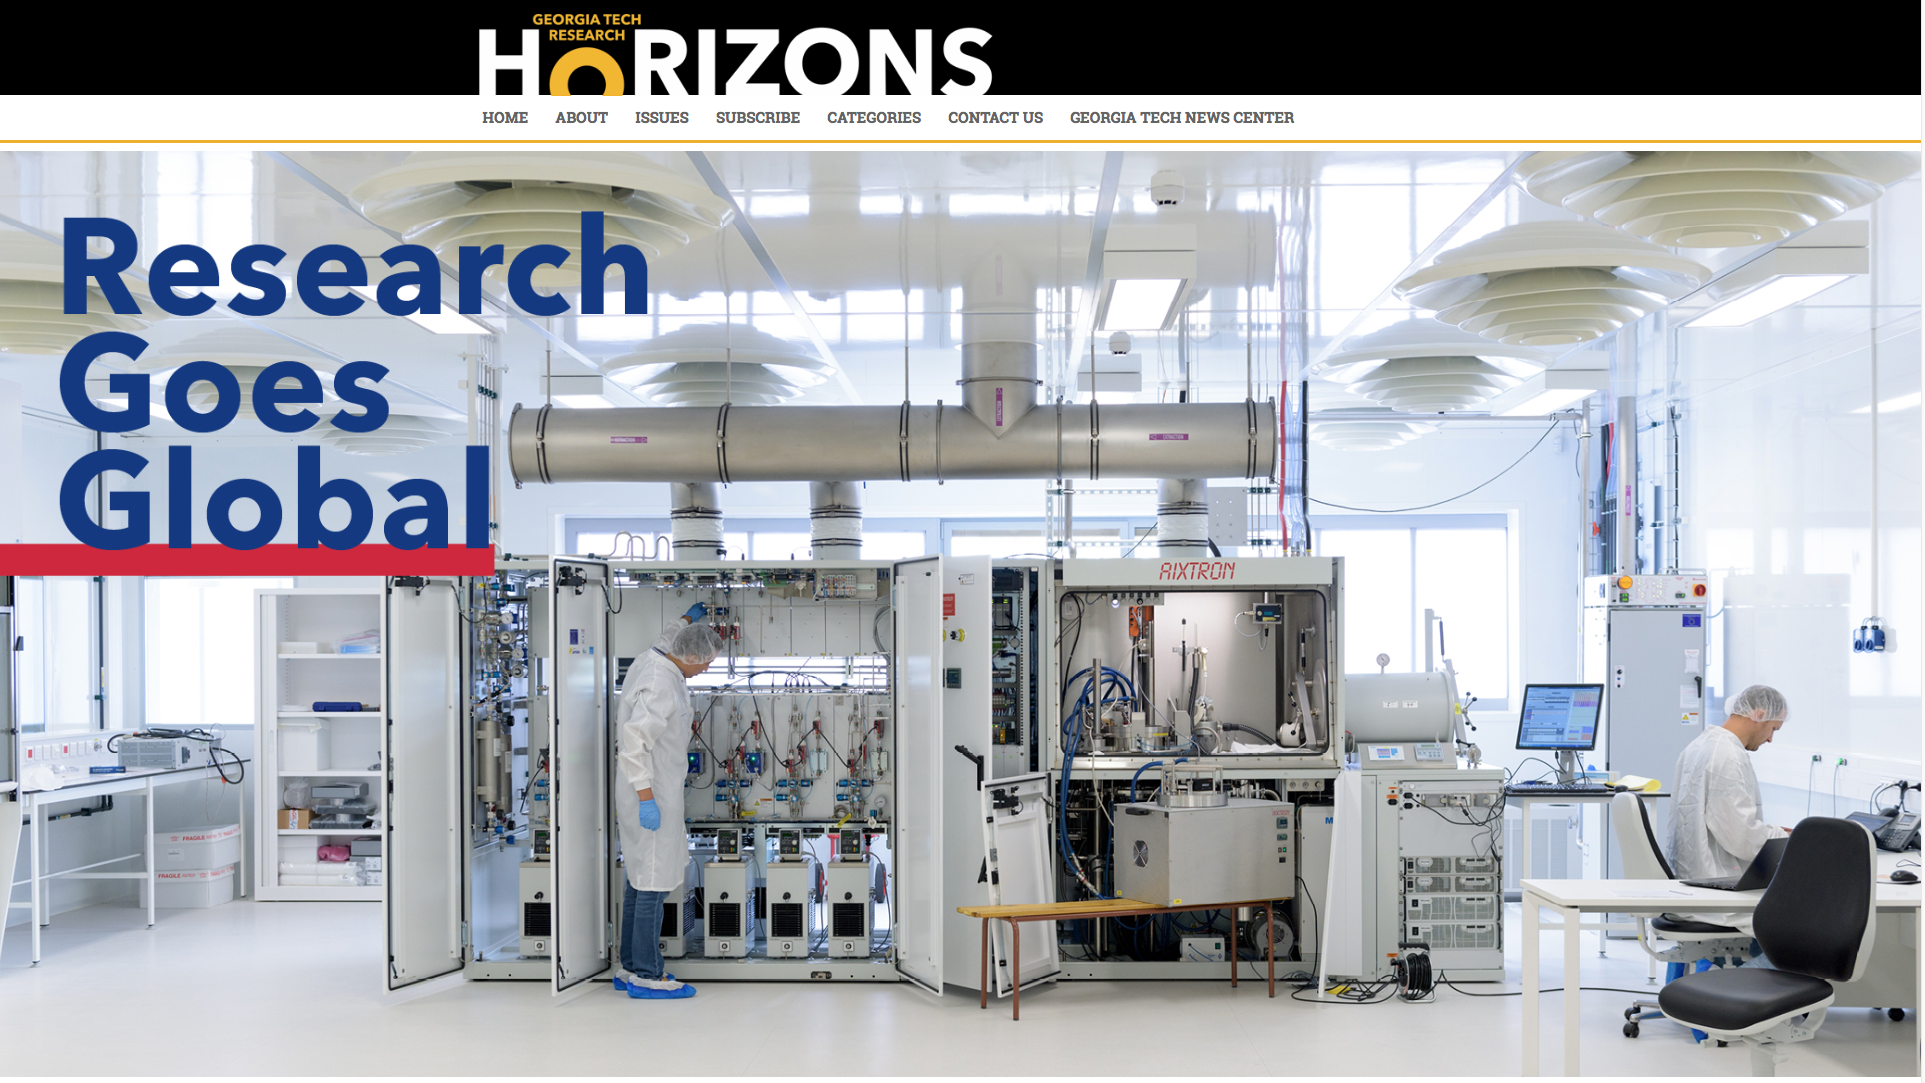 Article: "Research Goes Global," p.49 

Research Horizons, Issue 1, 2018